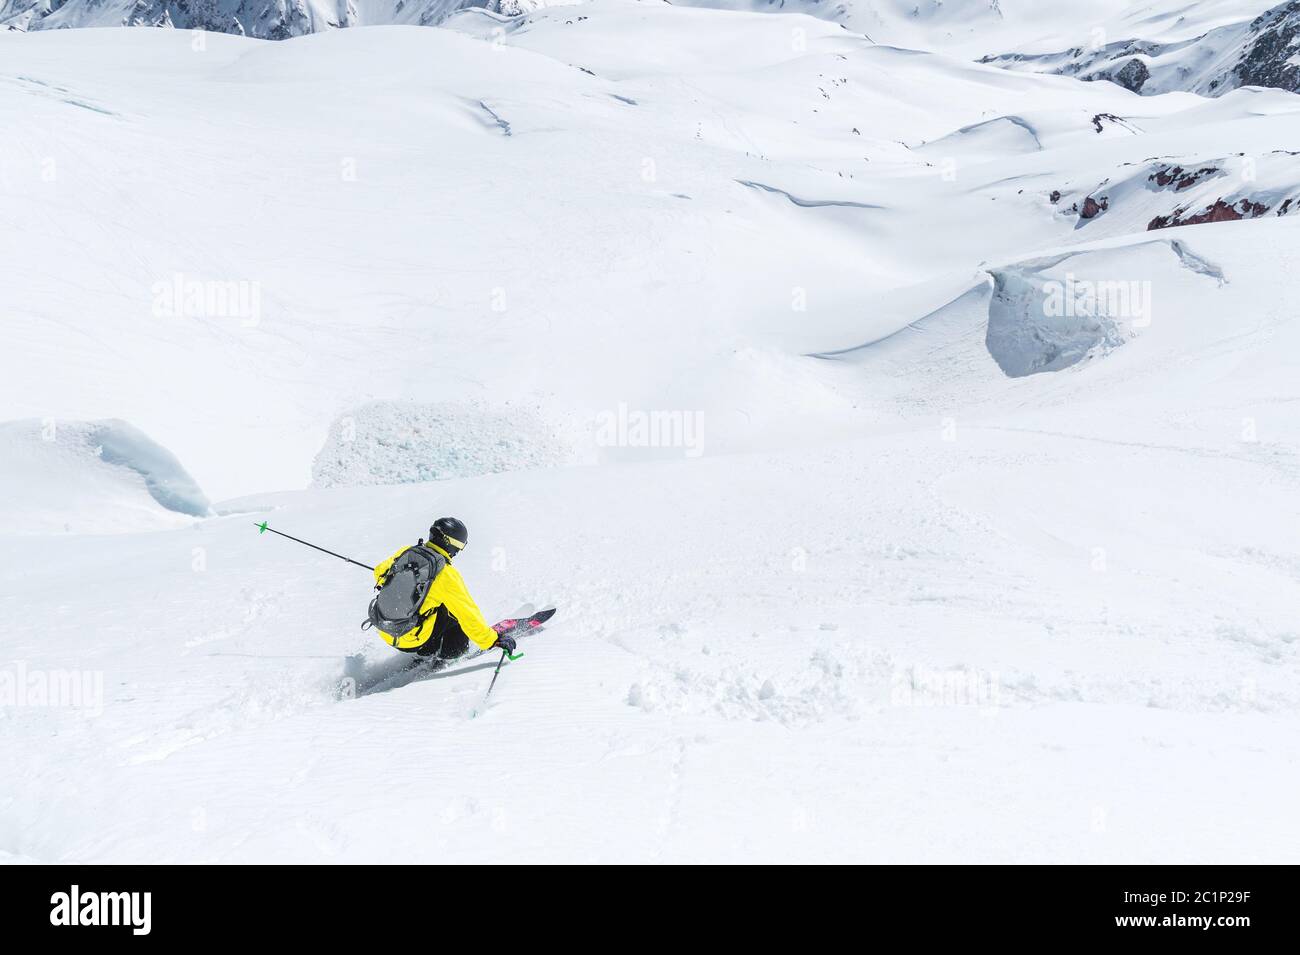 A skier at speed rides on a snowy slope freeride. The concept of winter extreme sports Stock Photo